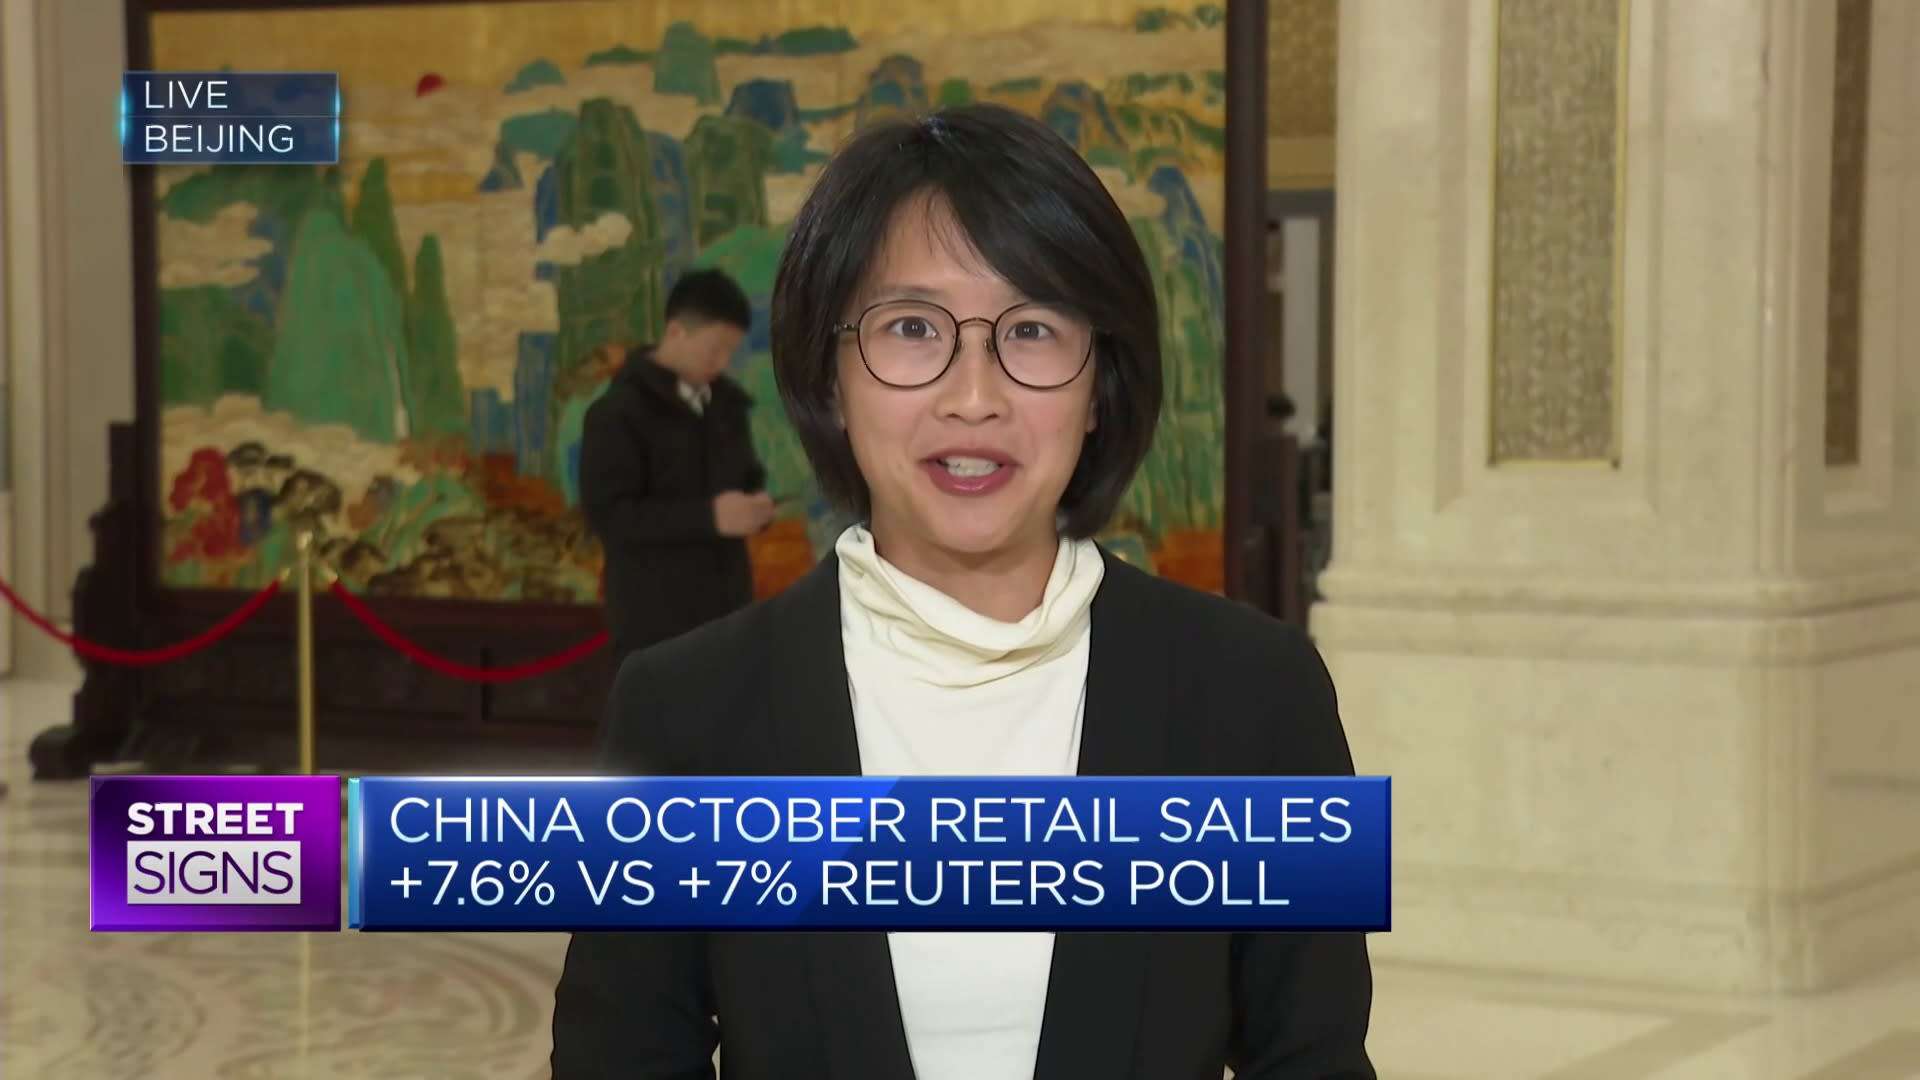 China's retail sector is recovering, but real estate continues to drag down growth